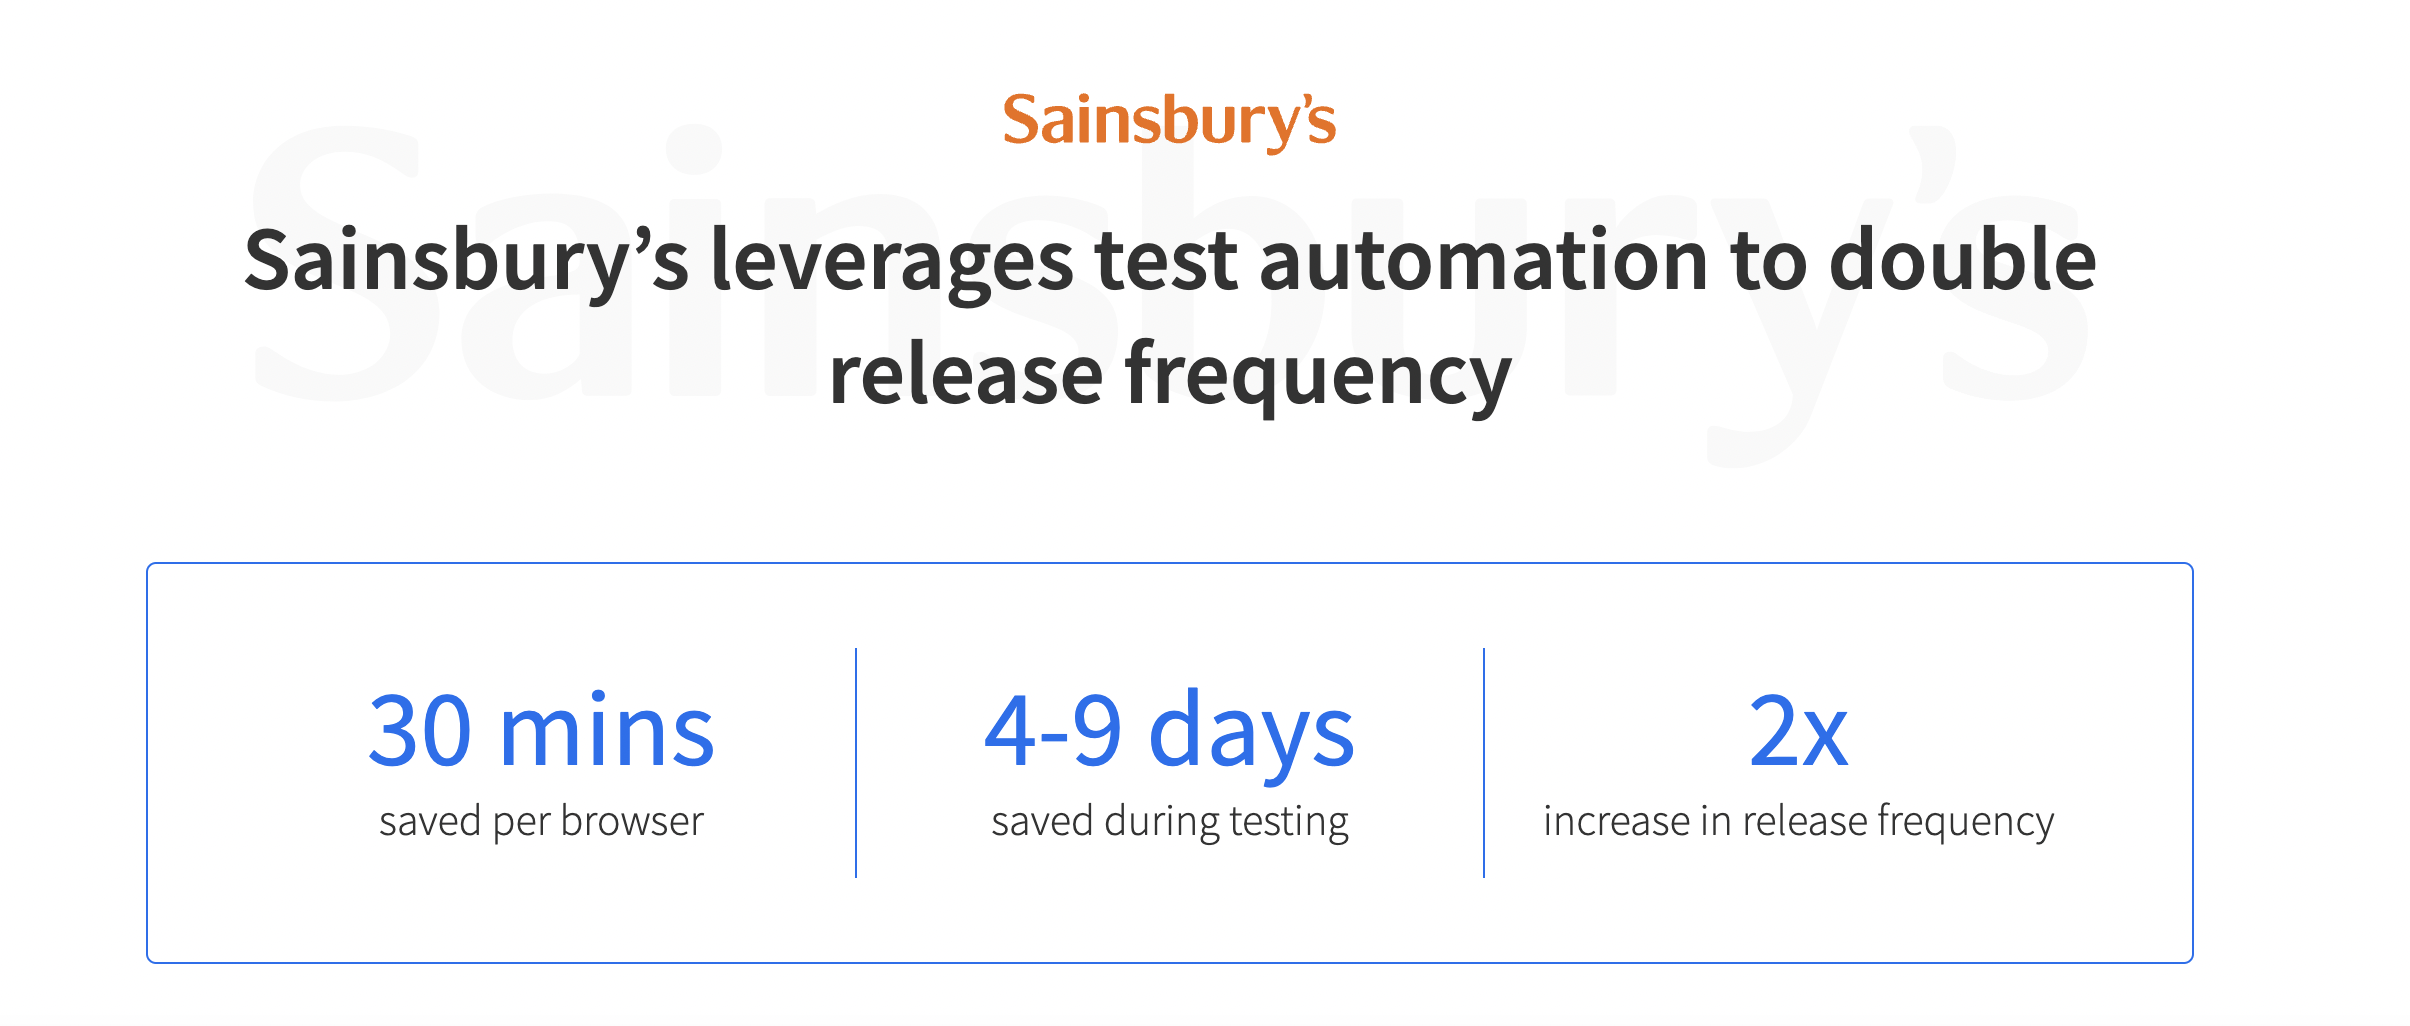 sainsburys leverages test automation to double release frequency